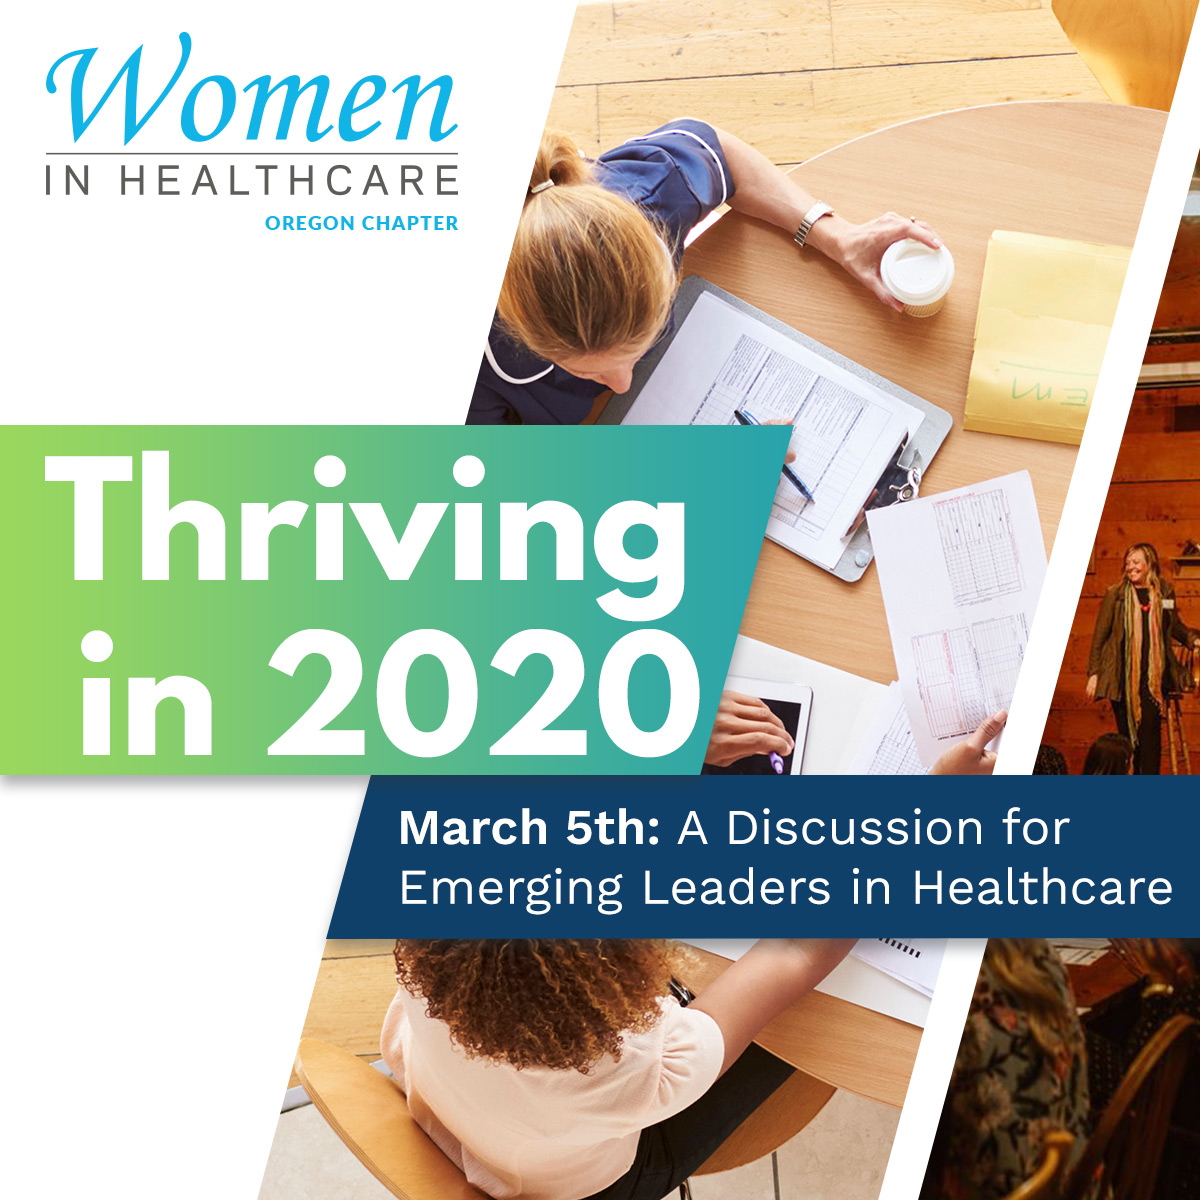 Oregon Chapter - Thriving in 2020: A Discussion for Emerging Leaders in Healthcare